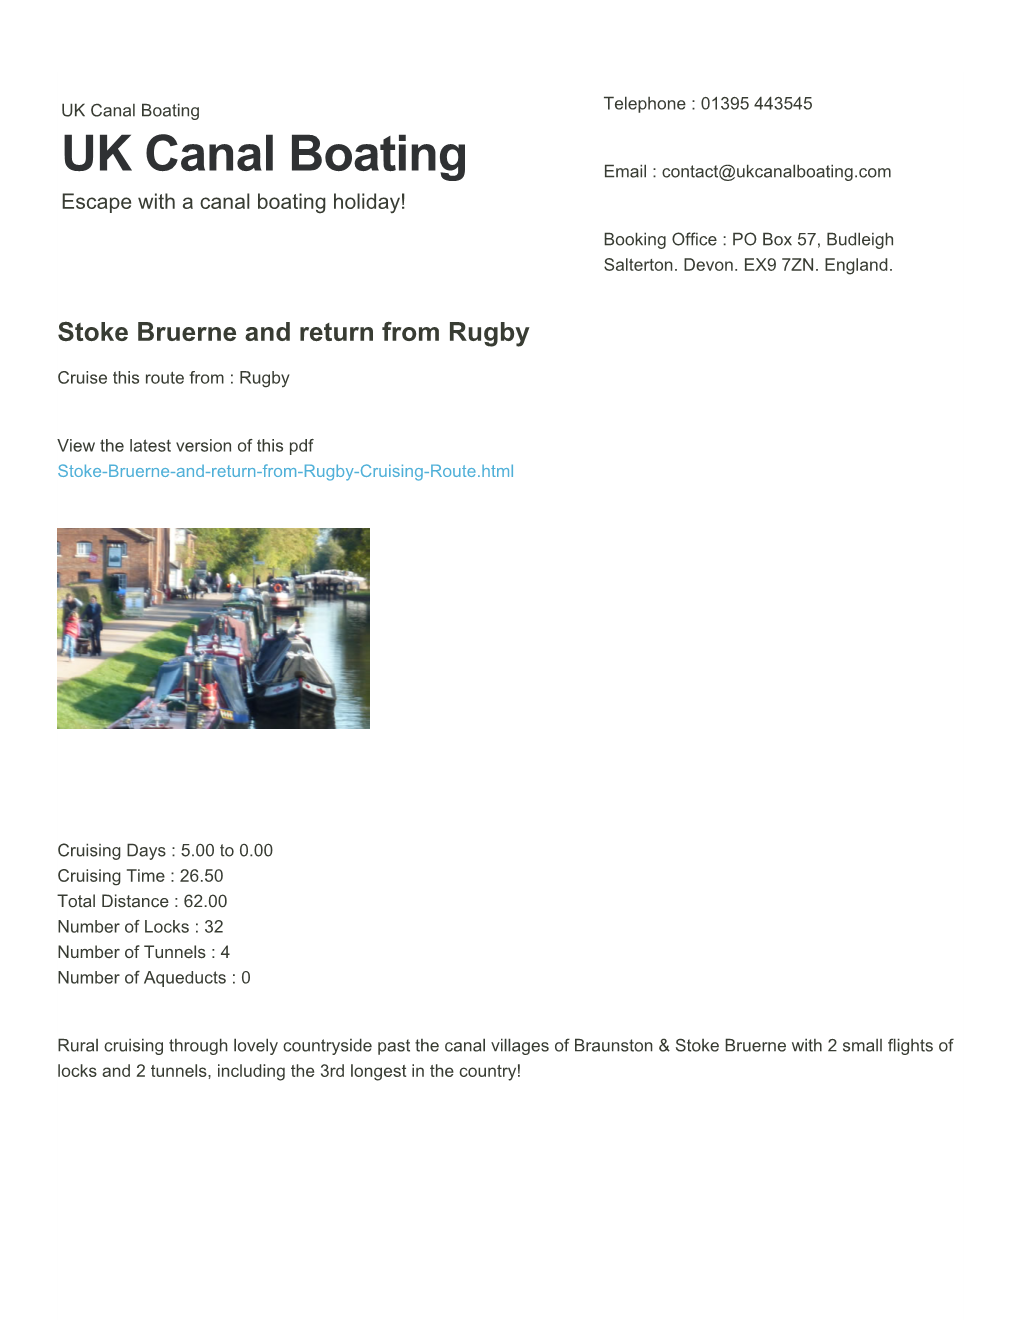 Stoke Bruerne and Return from Rugby | UK Canal Boating